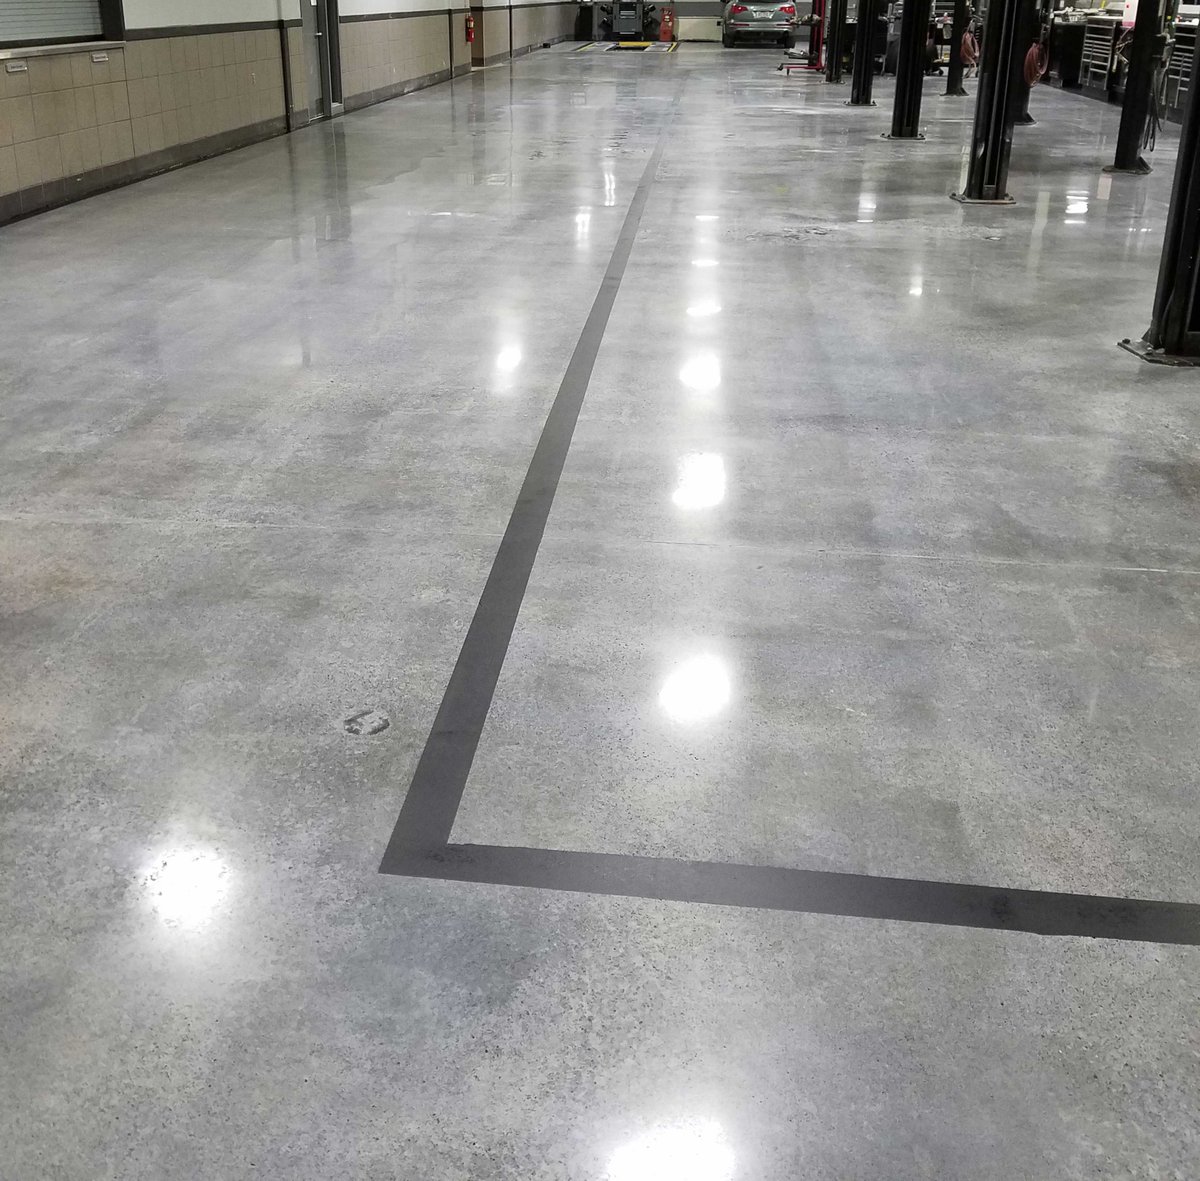 Let's explore different commercial flooring solutions and determine if your existing floor can be improved to better meet your facility's specific needs: bit.ly/3LtvtIn

#CommercialFloors #FacilitySolutions #FlooringOptions #FacilityManagement #IndustrialFloors